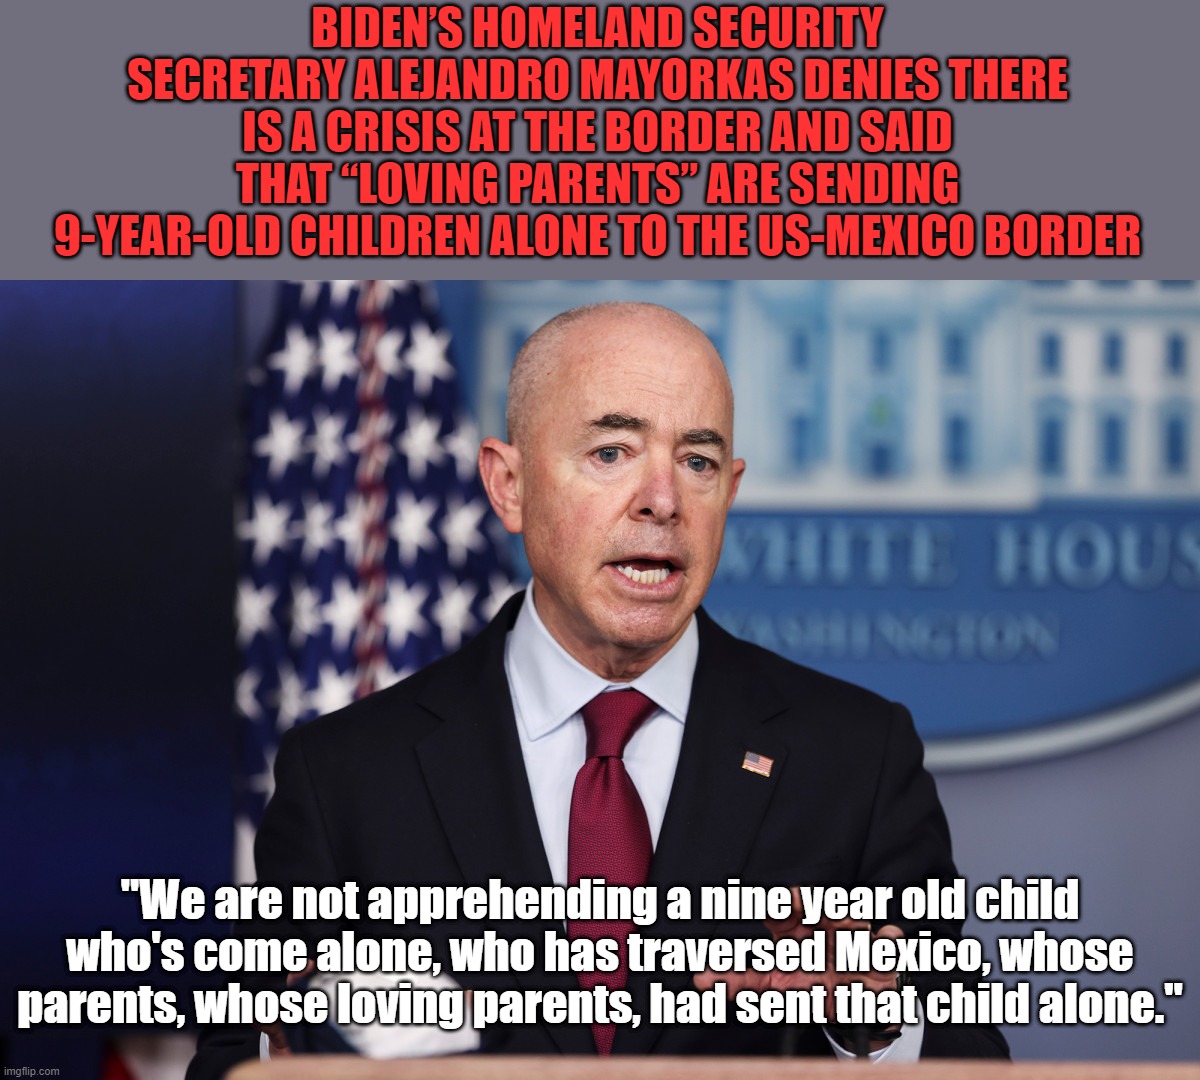 I'm glad my parents never loved me that much! | BIDEN’S HOMELAND SECURITY SECRETARY ALEJANDRO MAYORKAS DENIES THERE IS A CRISIS AT THE BORDER AND SAID THAT “LOVING PARENTS” ARE SENDING 9-YEAR-OLD CHILDREN ALONE TO THE US-MEXICO BORDER; "We are not apprehending a nine year old child who's come alone, who has traversed Mexico, whose parents, whose loving parents, had sent that child alone." | image tagged in biden,biden border crisis | made w/ Imgflip meme maker